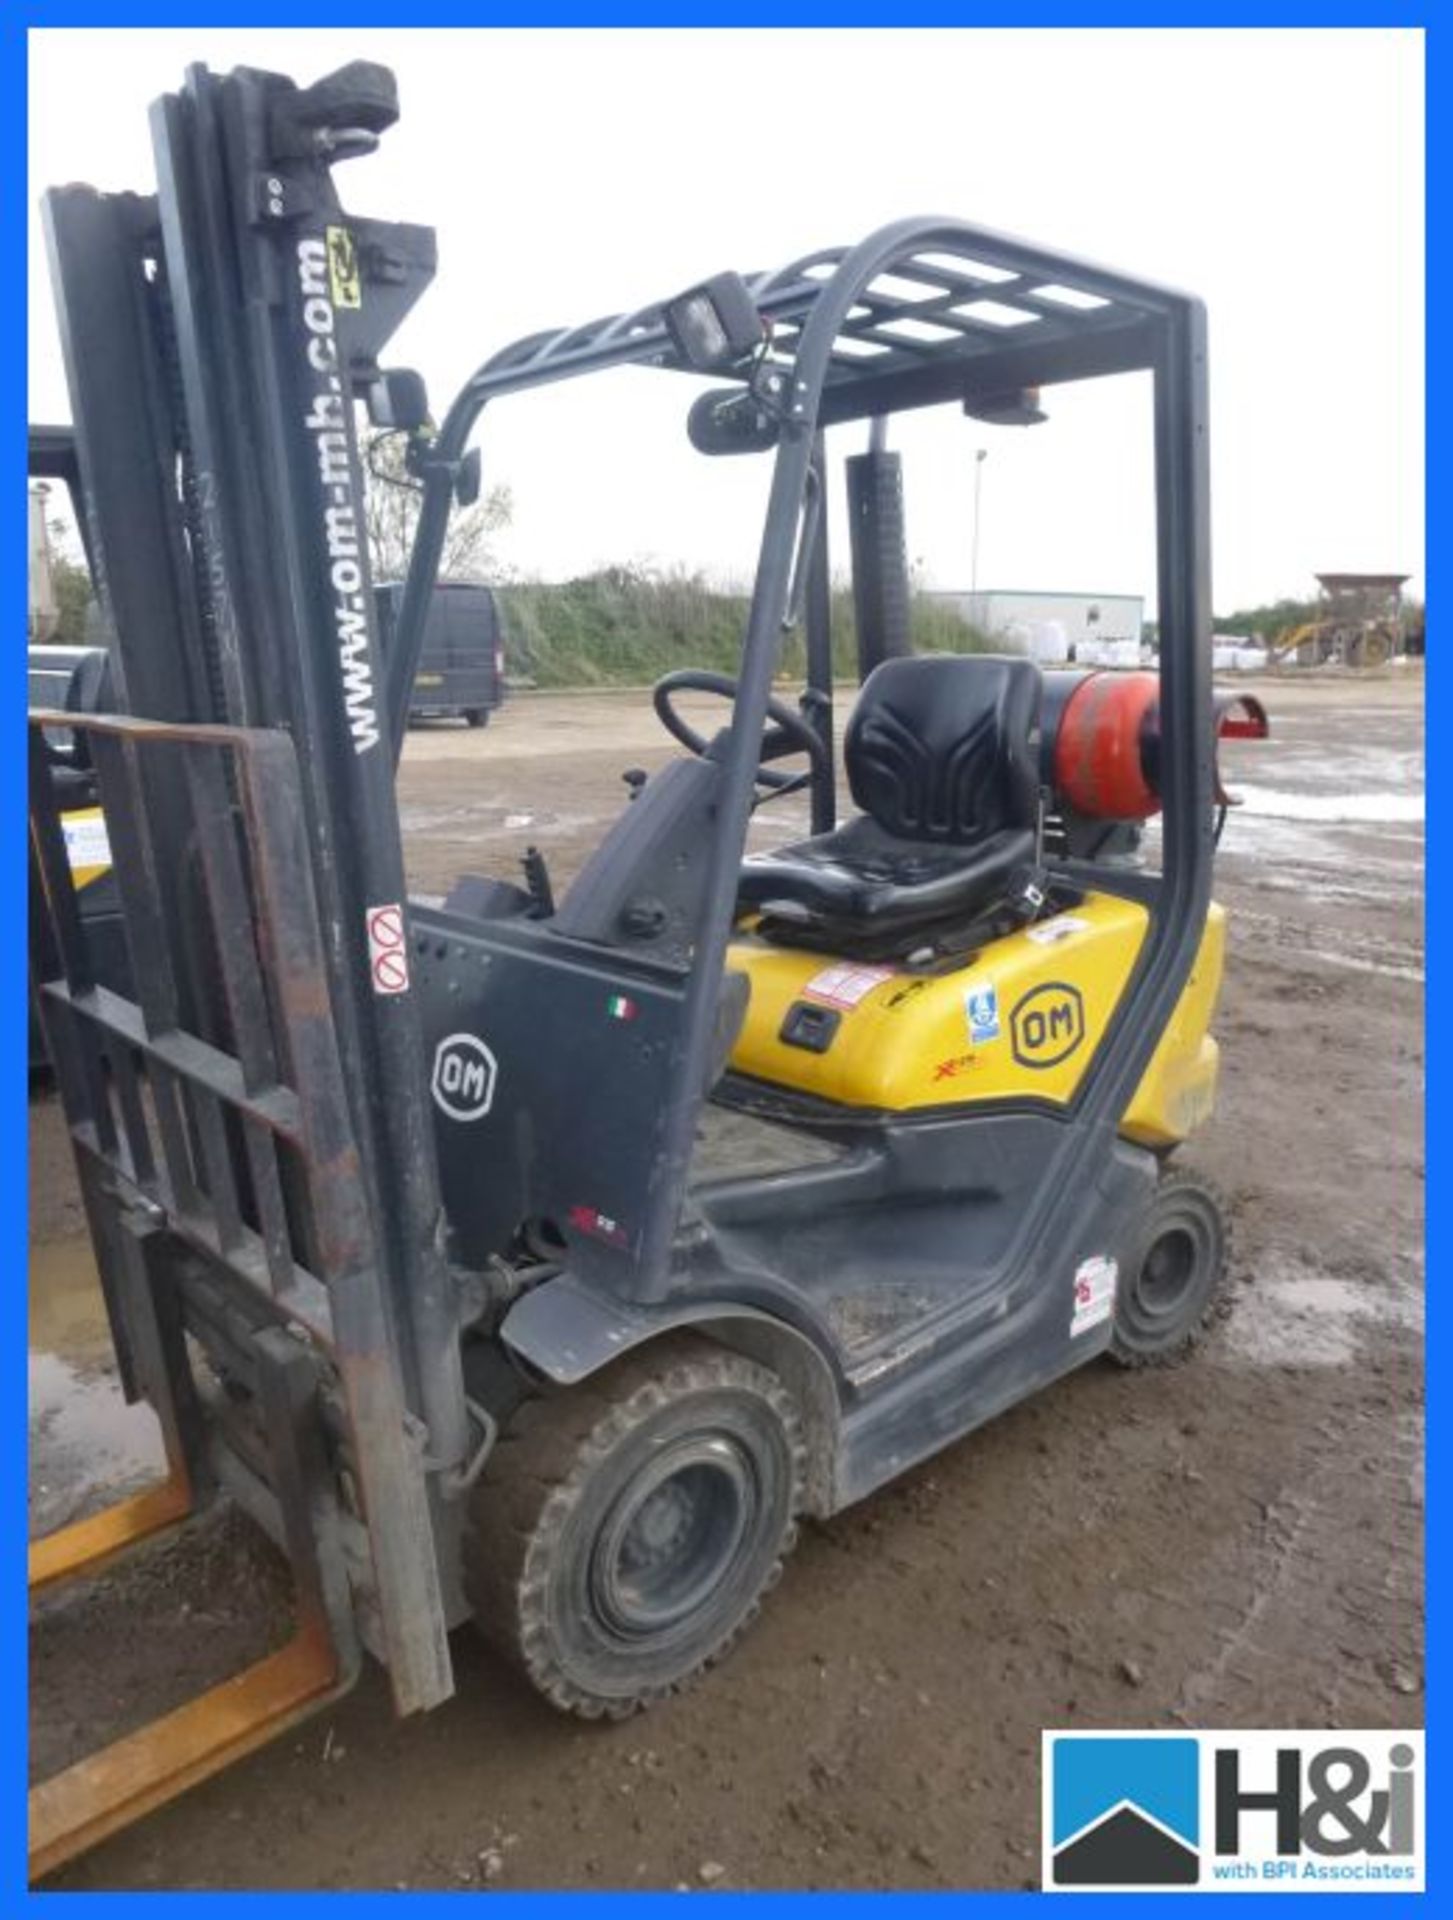 OM XG15. 1500 kg Gas forklift. Side shift. Double mast. HOURS 9370.4. In working order. Viewing - Image 4 of 7